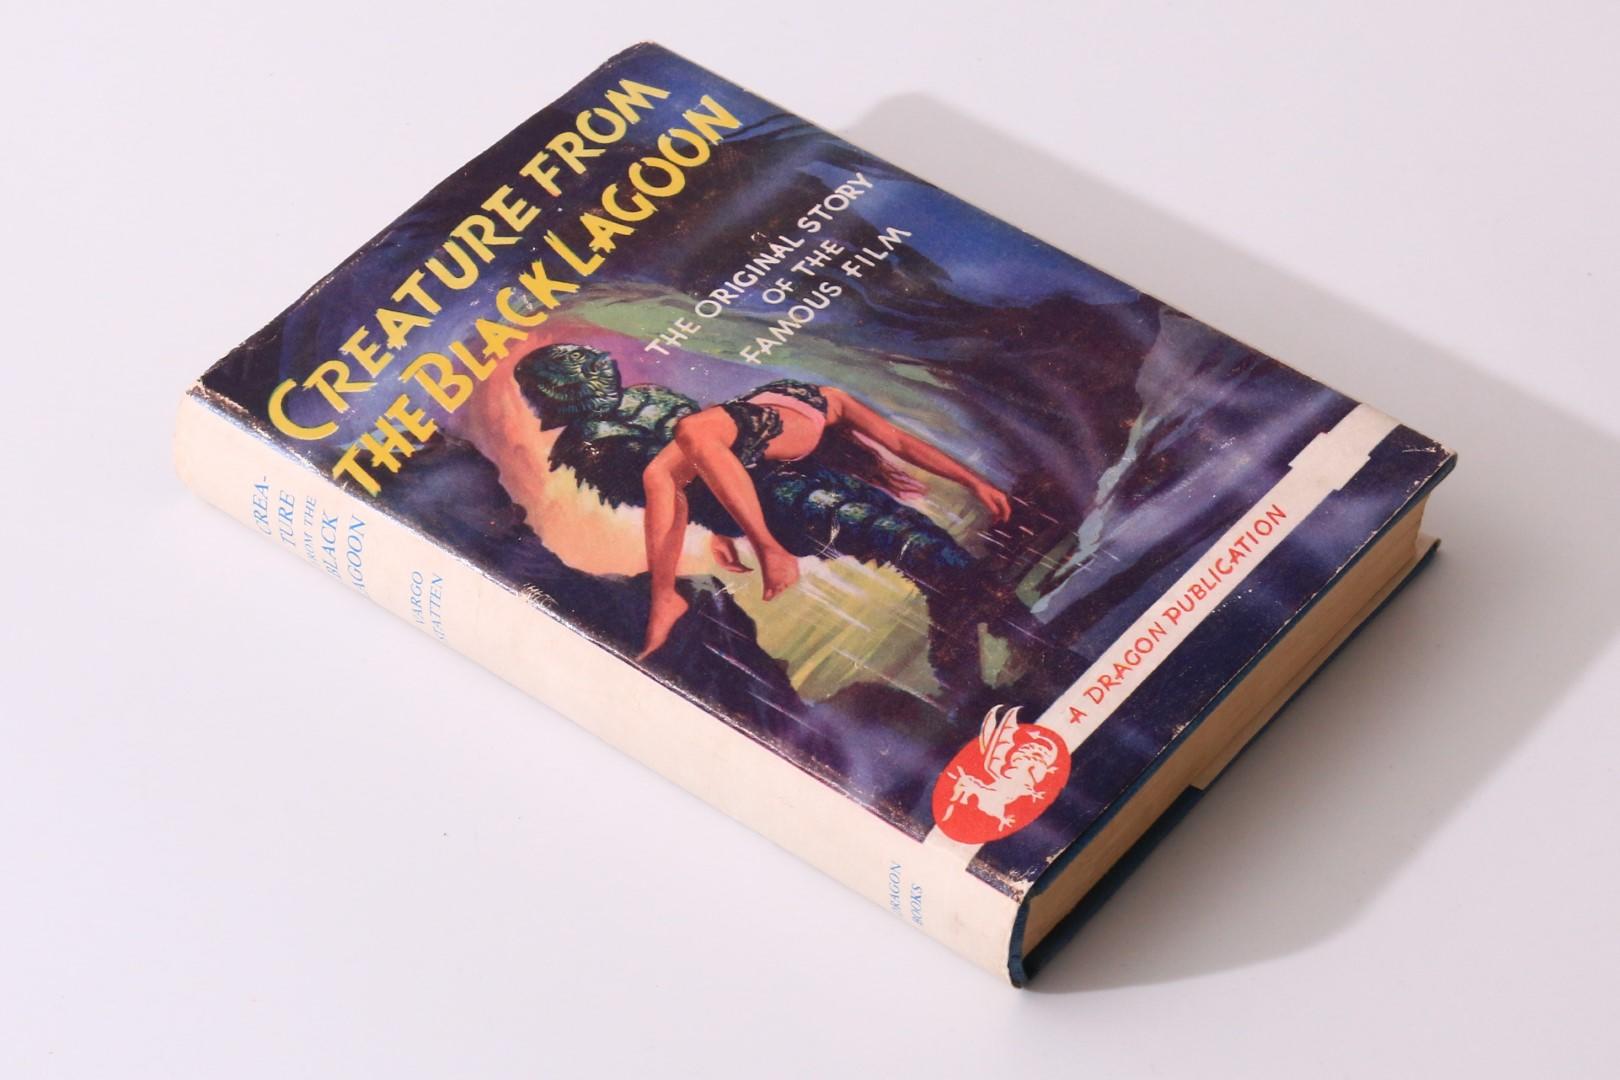 Vargo Statten - Creature from the Black Lagoon - Dragon Publications, 1954, First Edition.